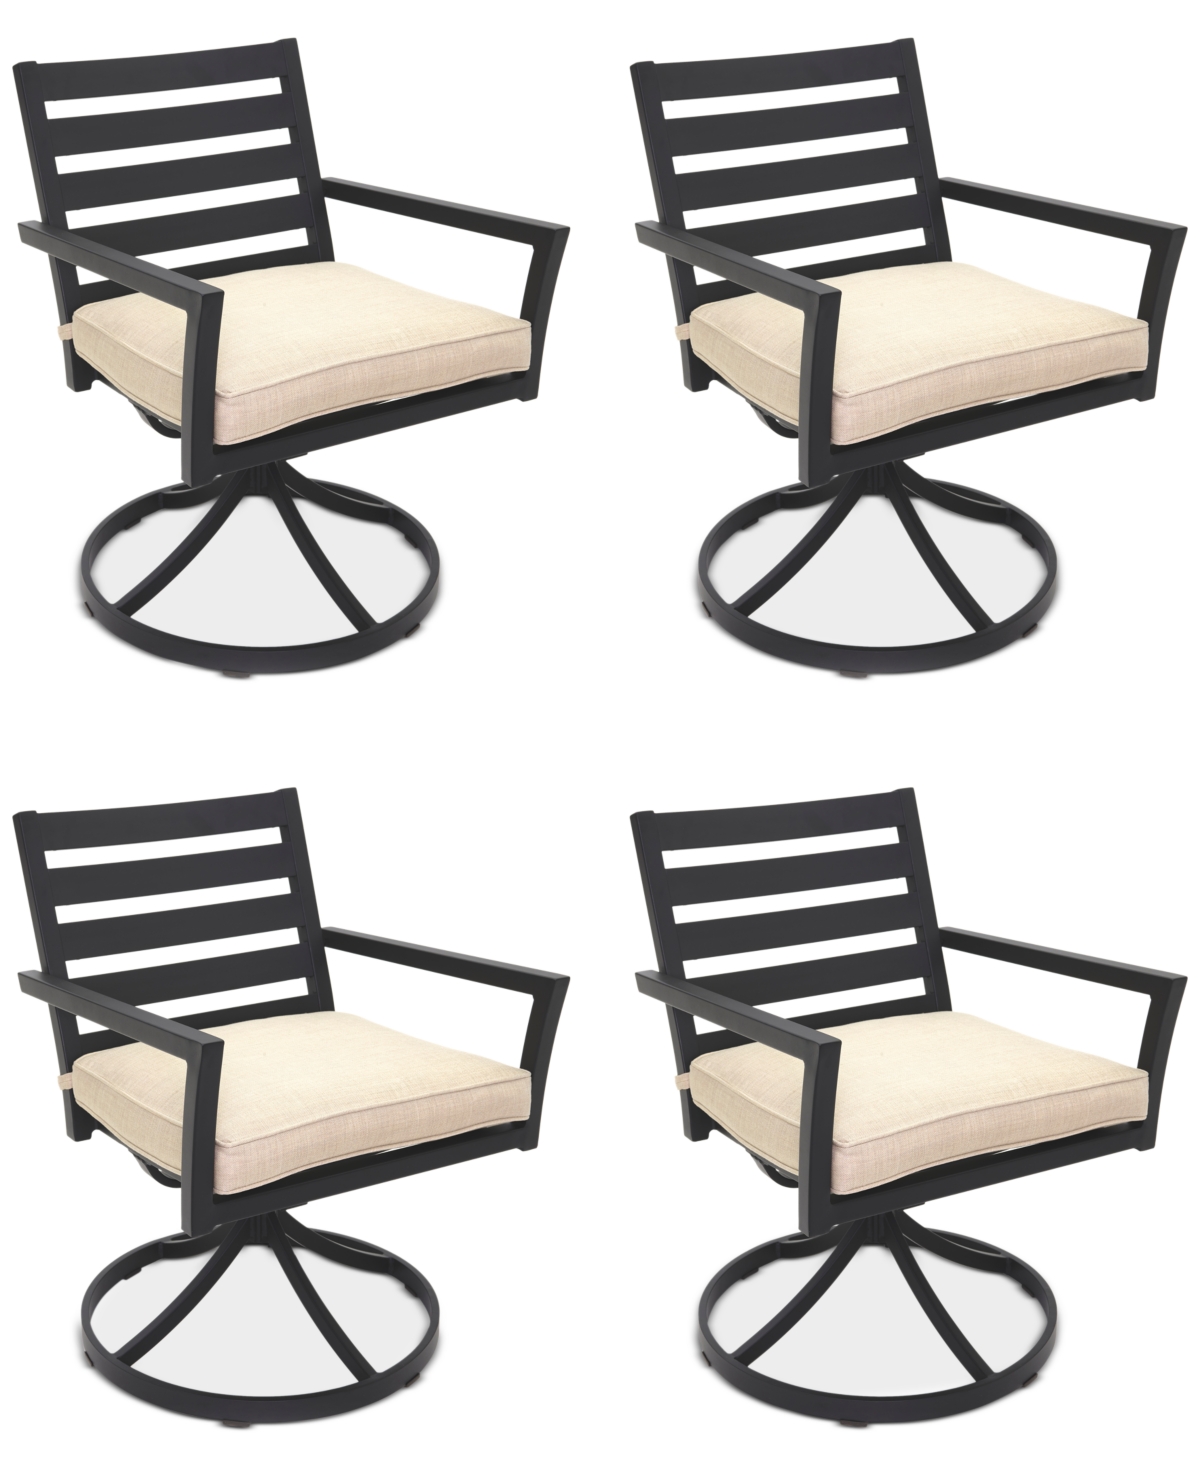 Agio Astaire Outdoor 4-pc Swivel Chair Bundle Set In Straw Natural